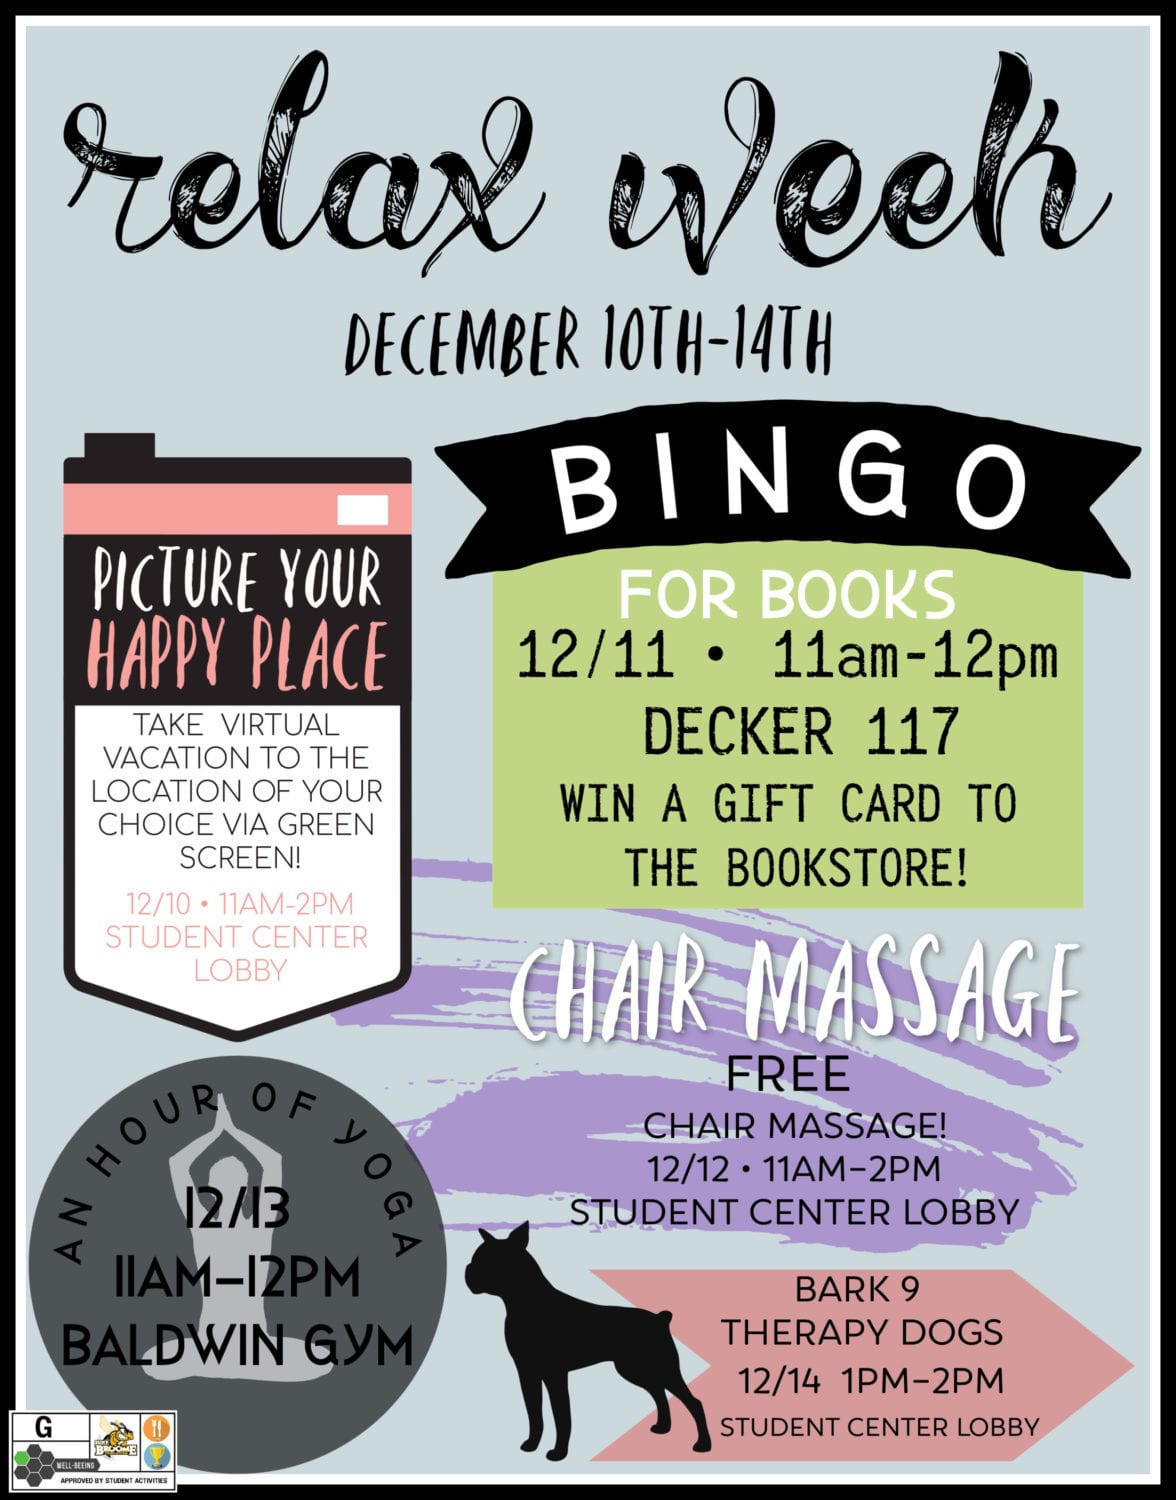 Find your mellow: Relax Week from Dec. 10 through 14